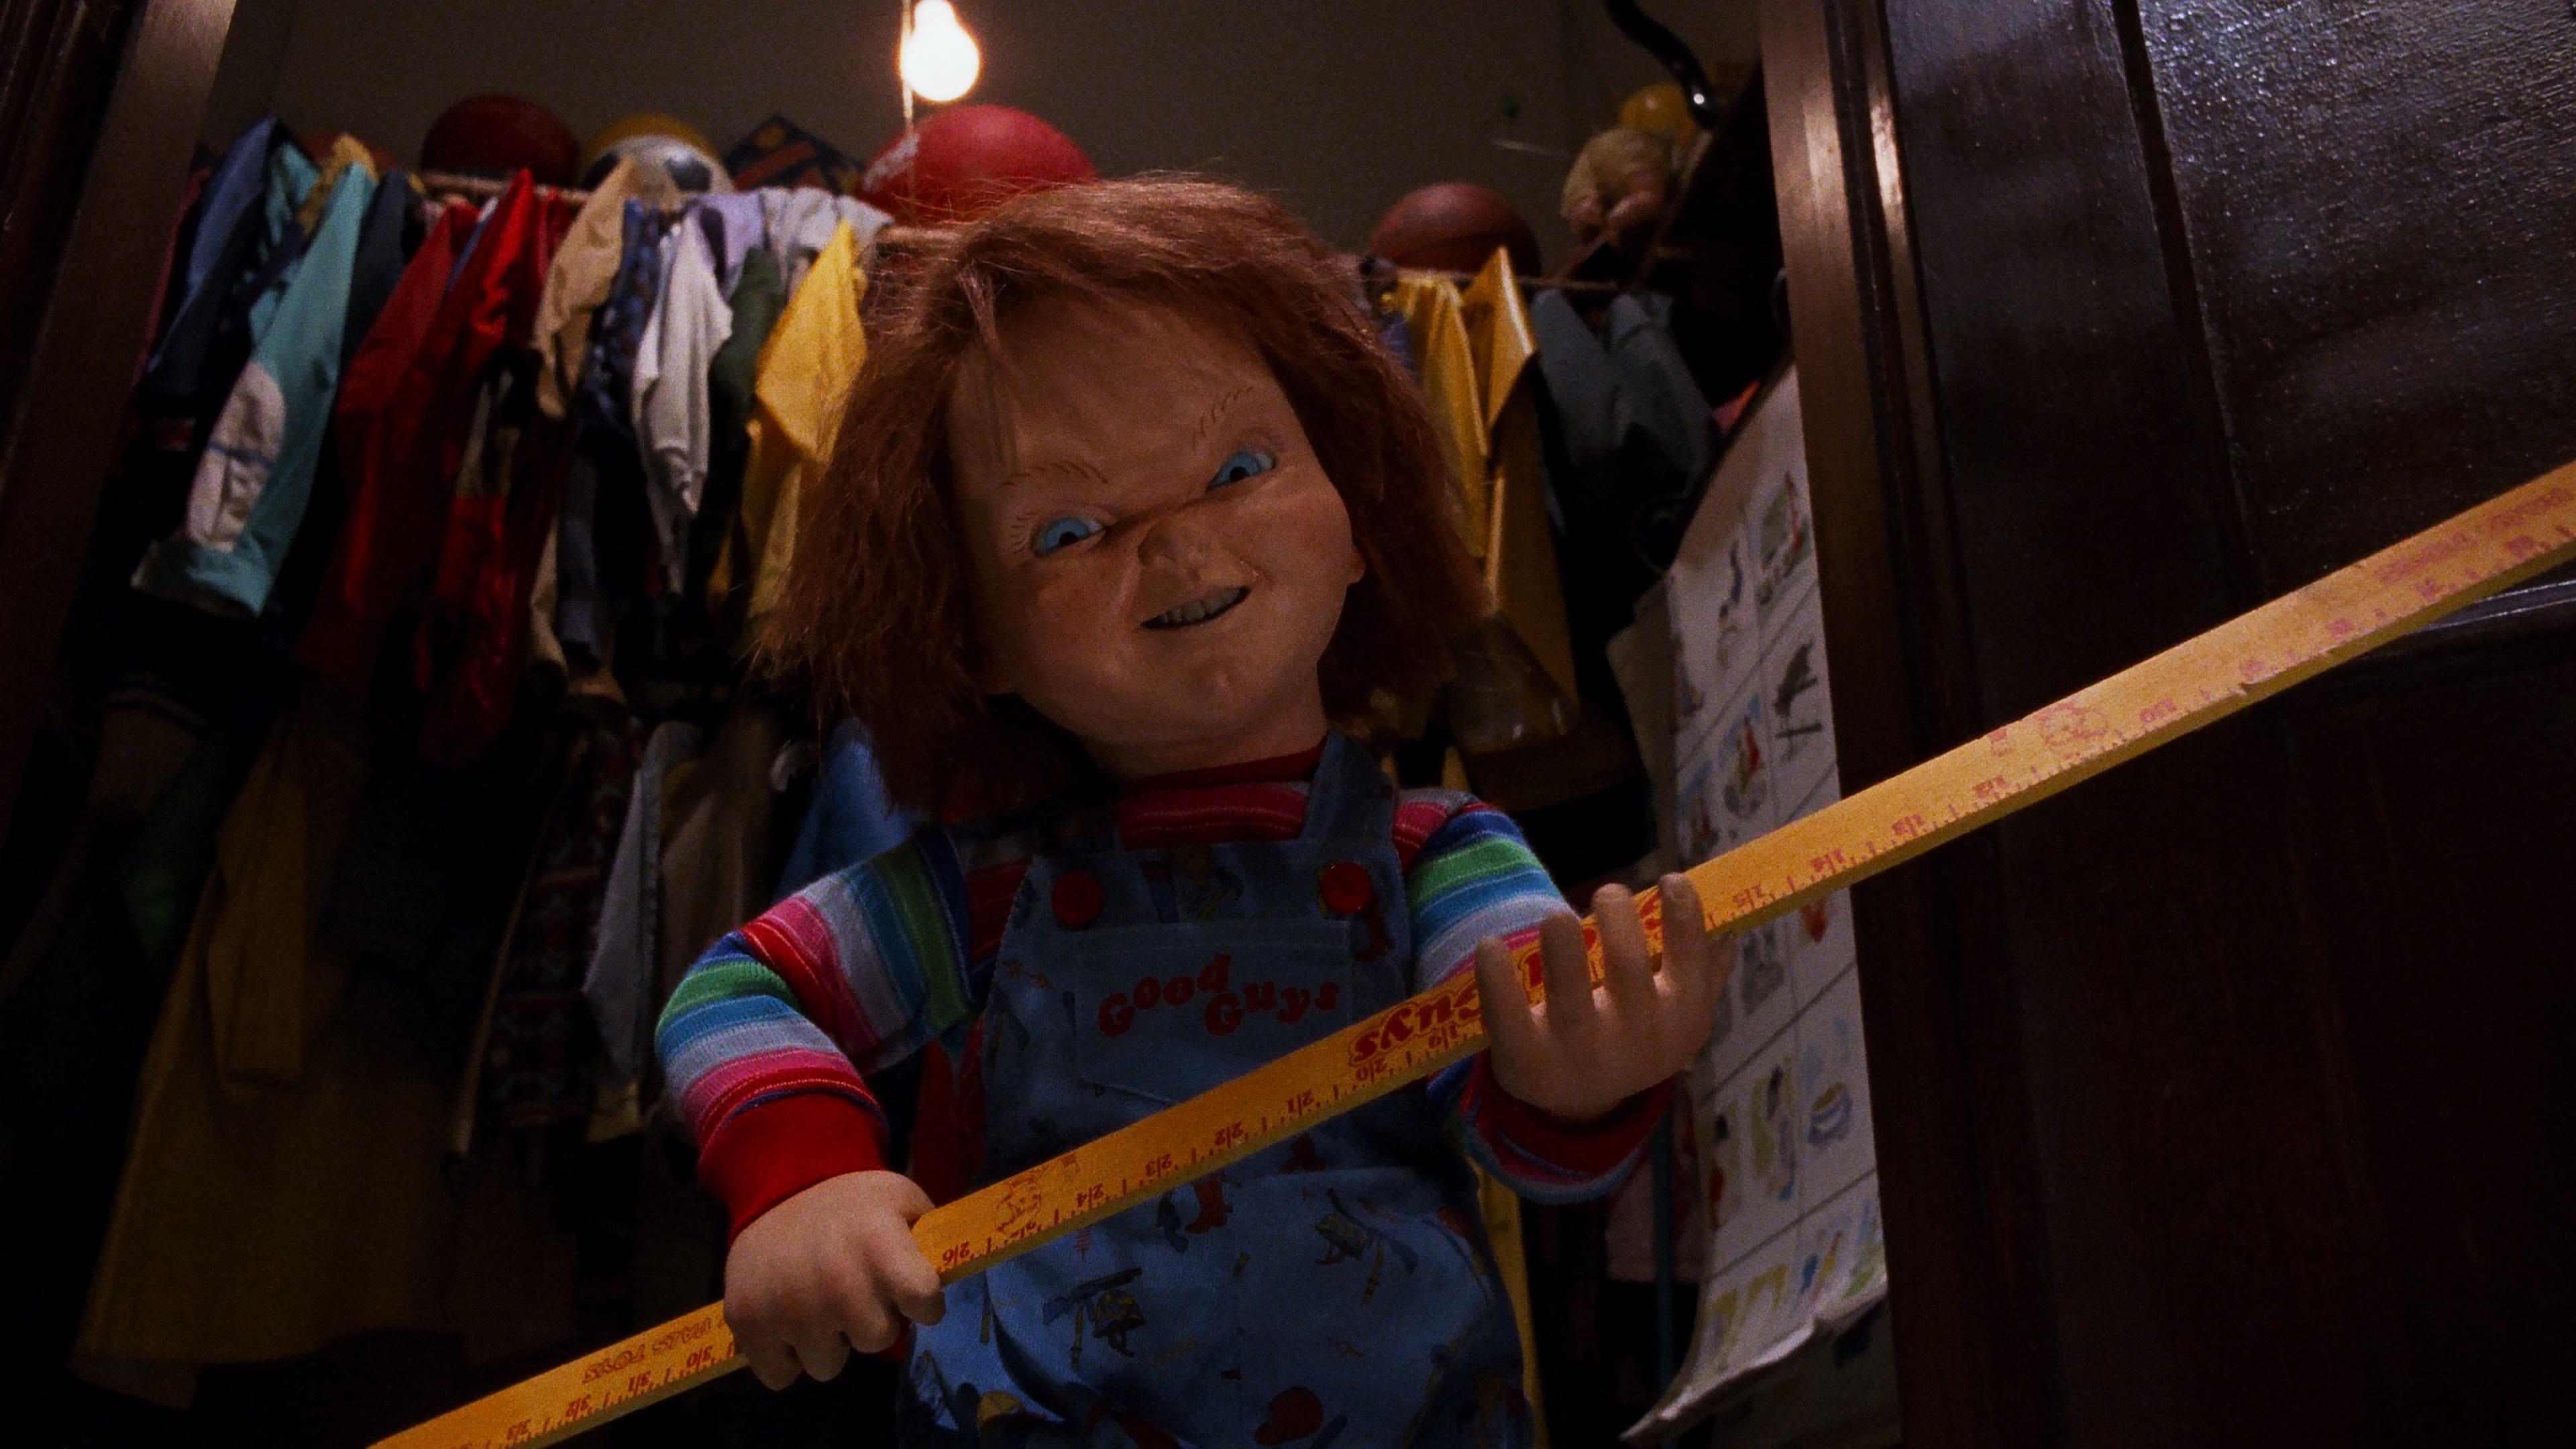 Child's Play 2 backdrop